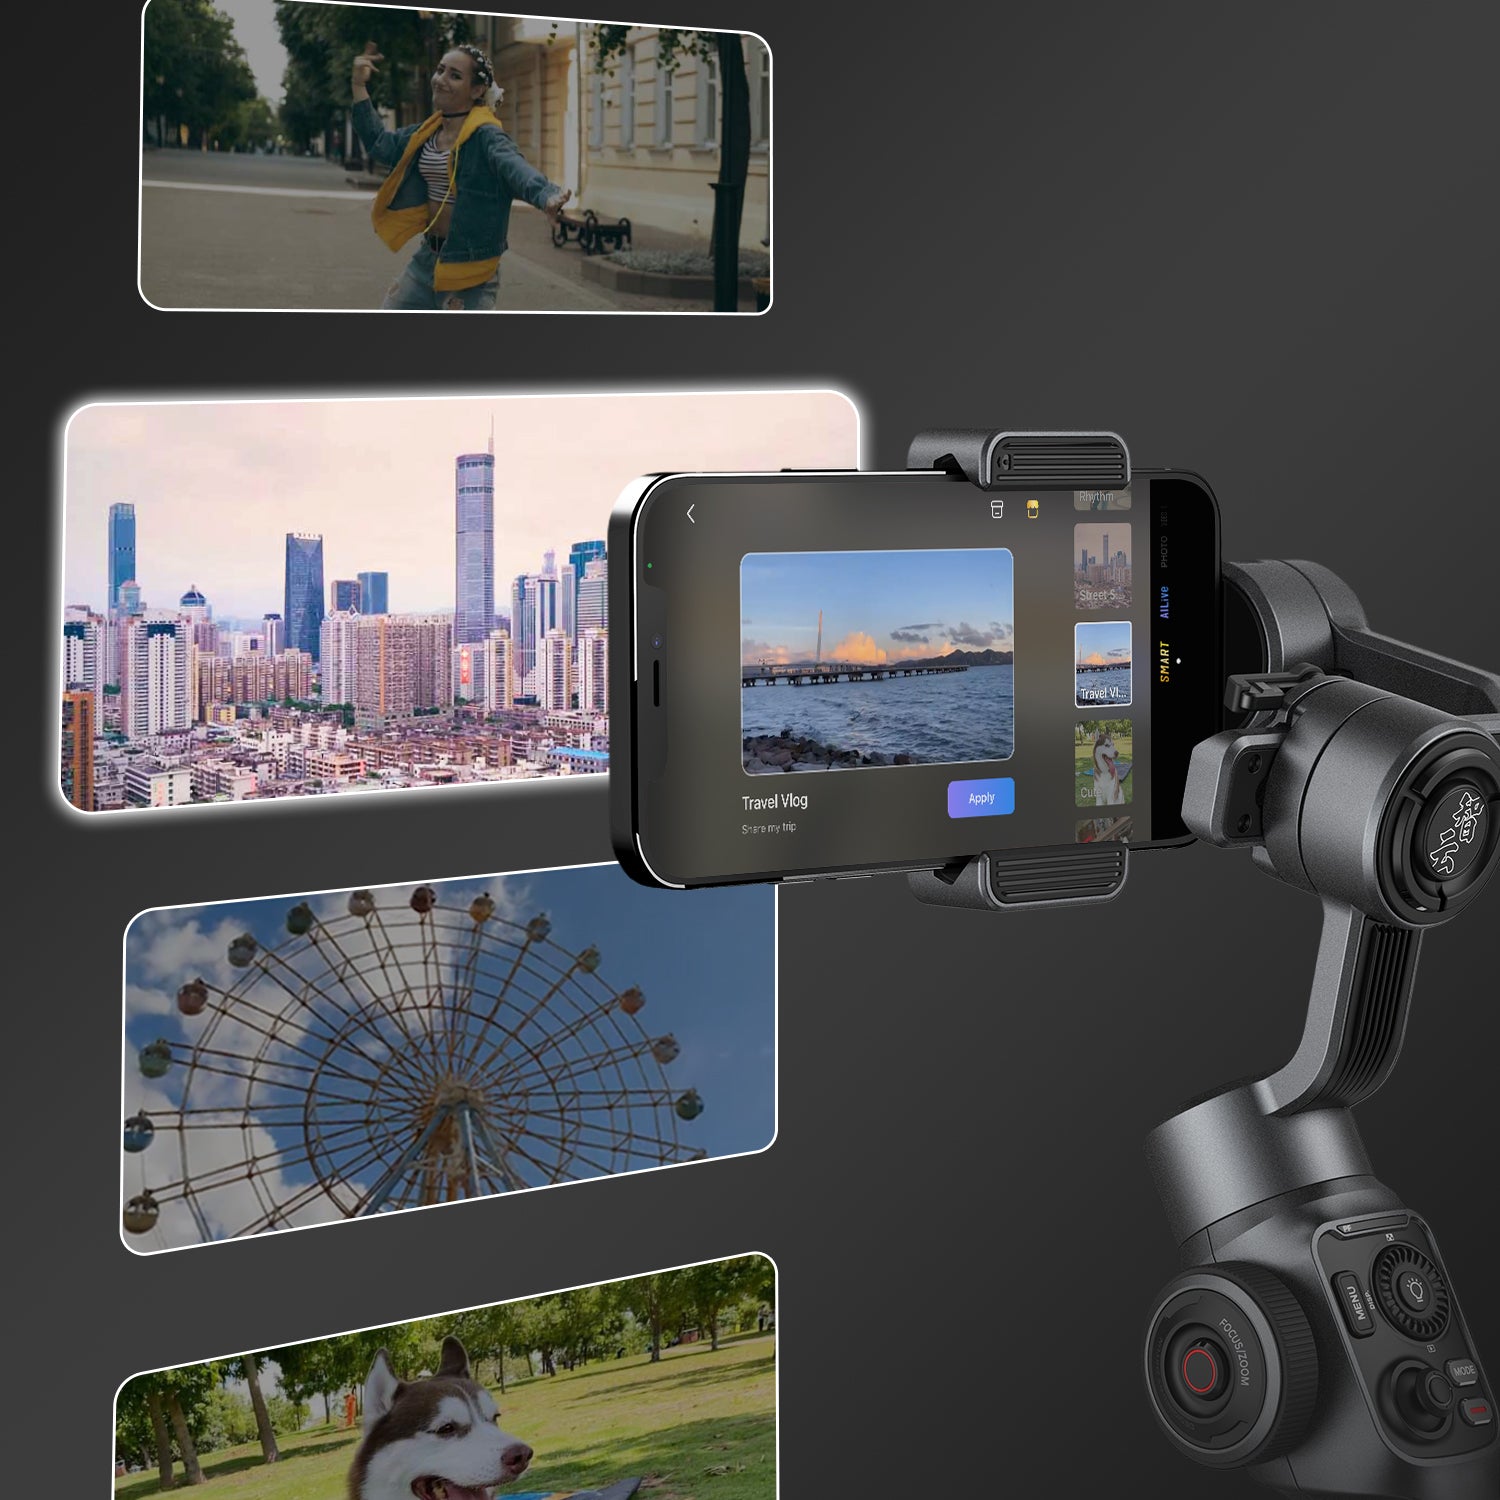 Dozens of video templates are available under SMART mode